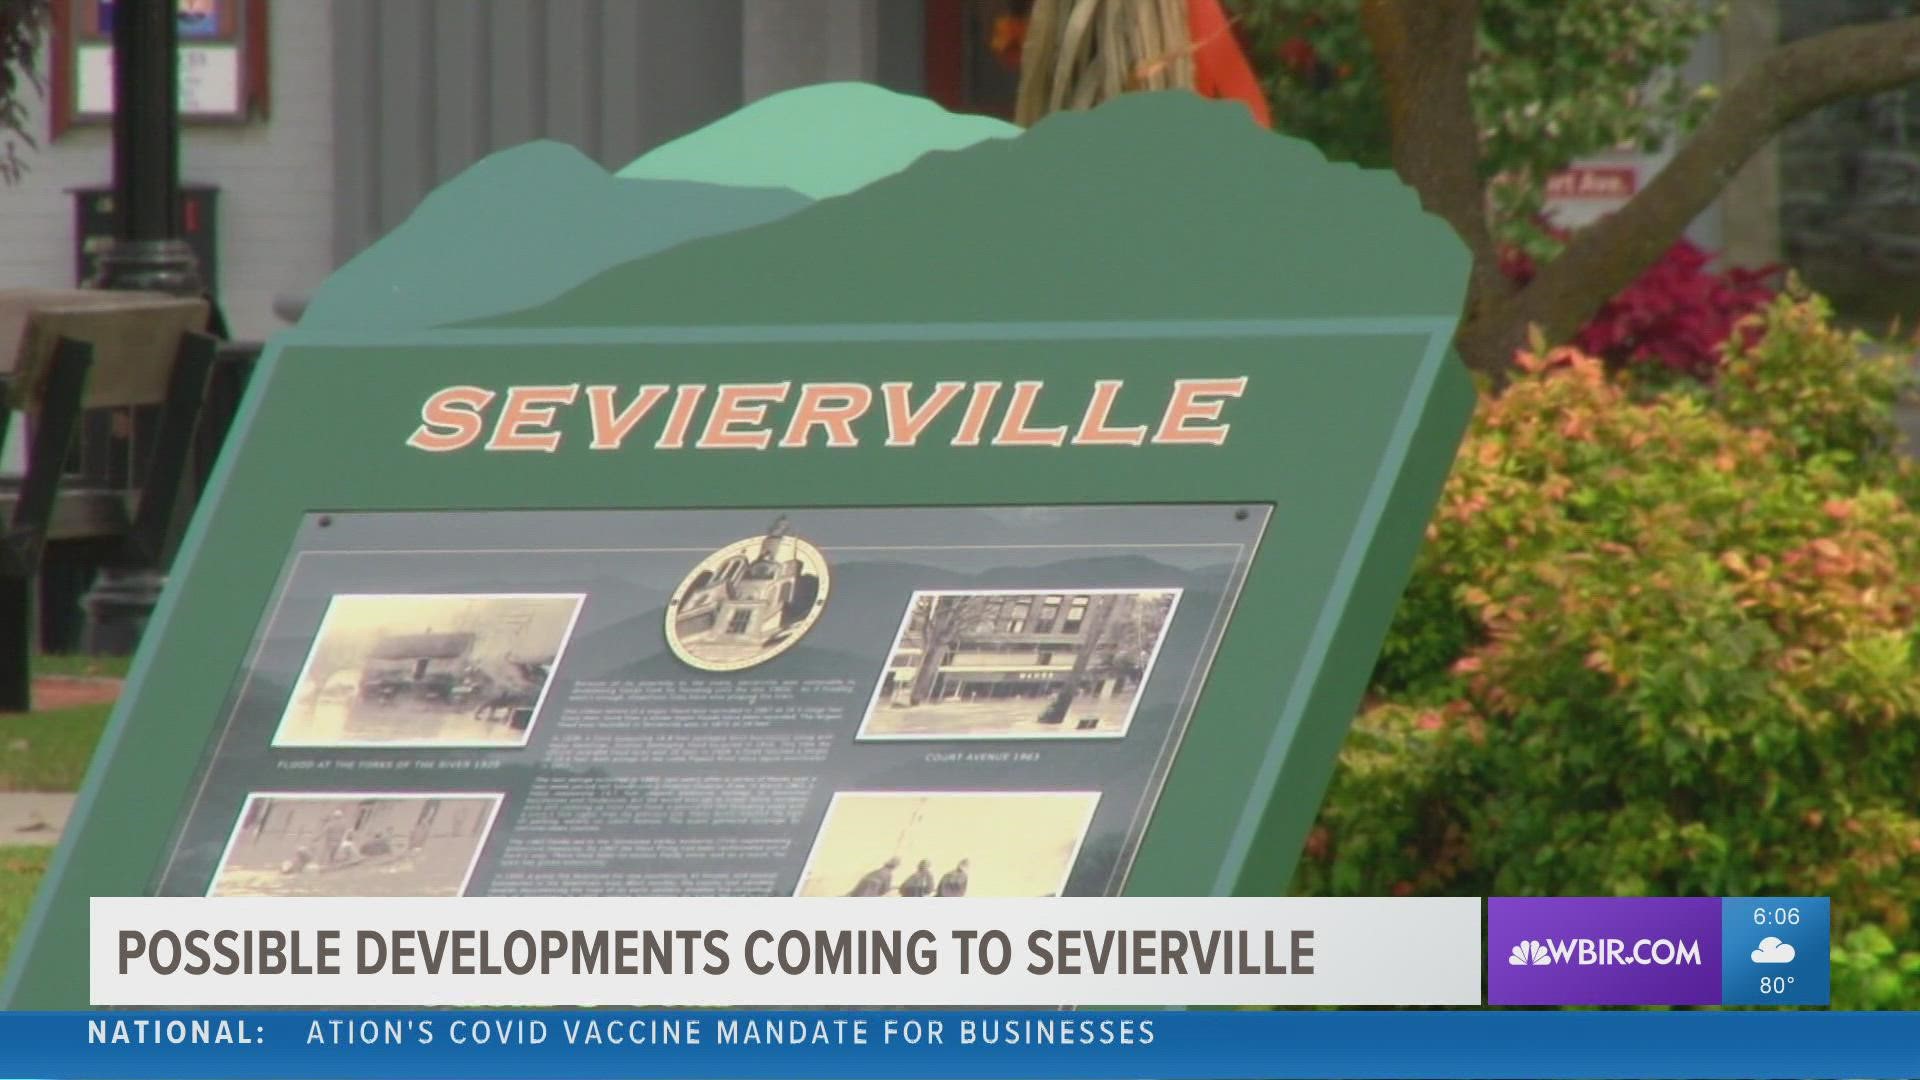 "We have had a 20% population growth just within the City of Sevierville," said the city's development director.